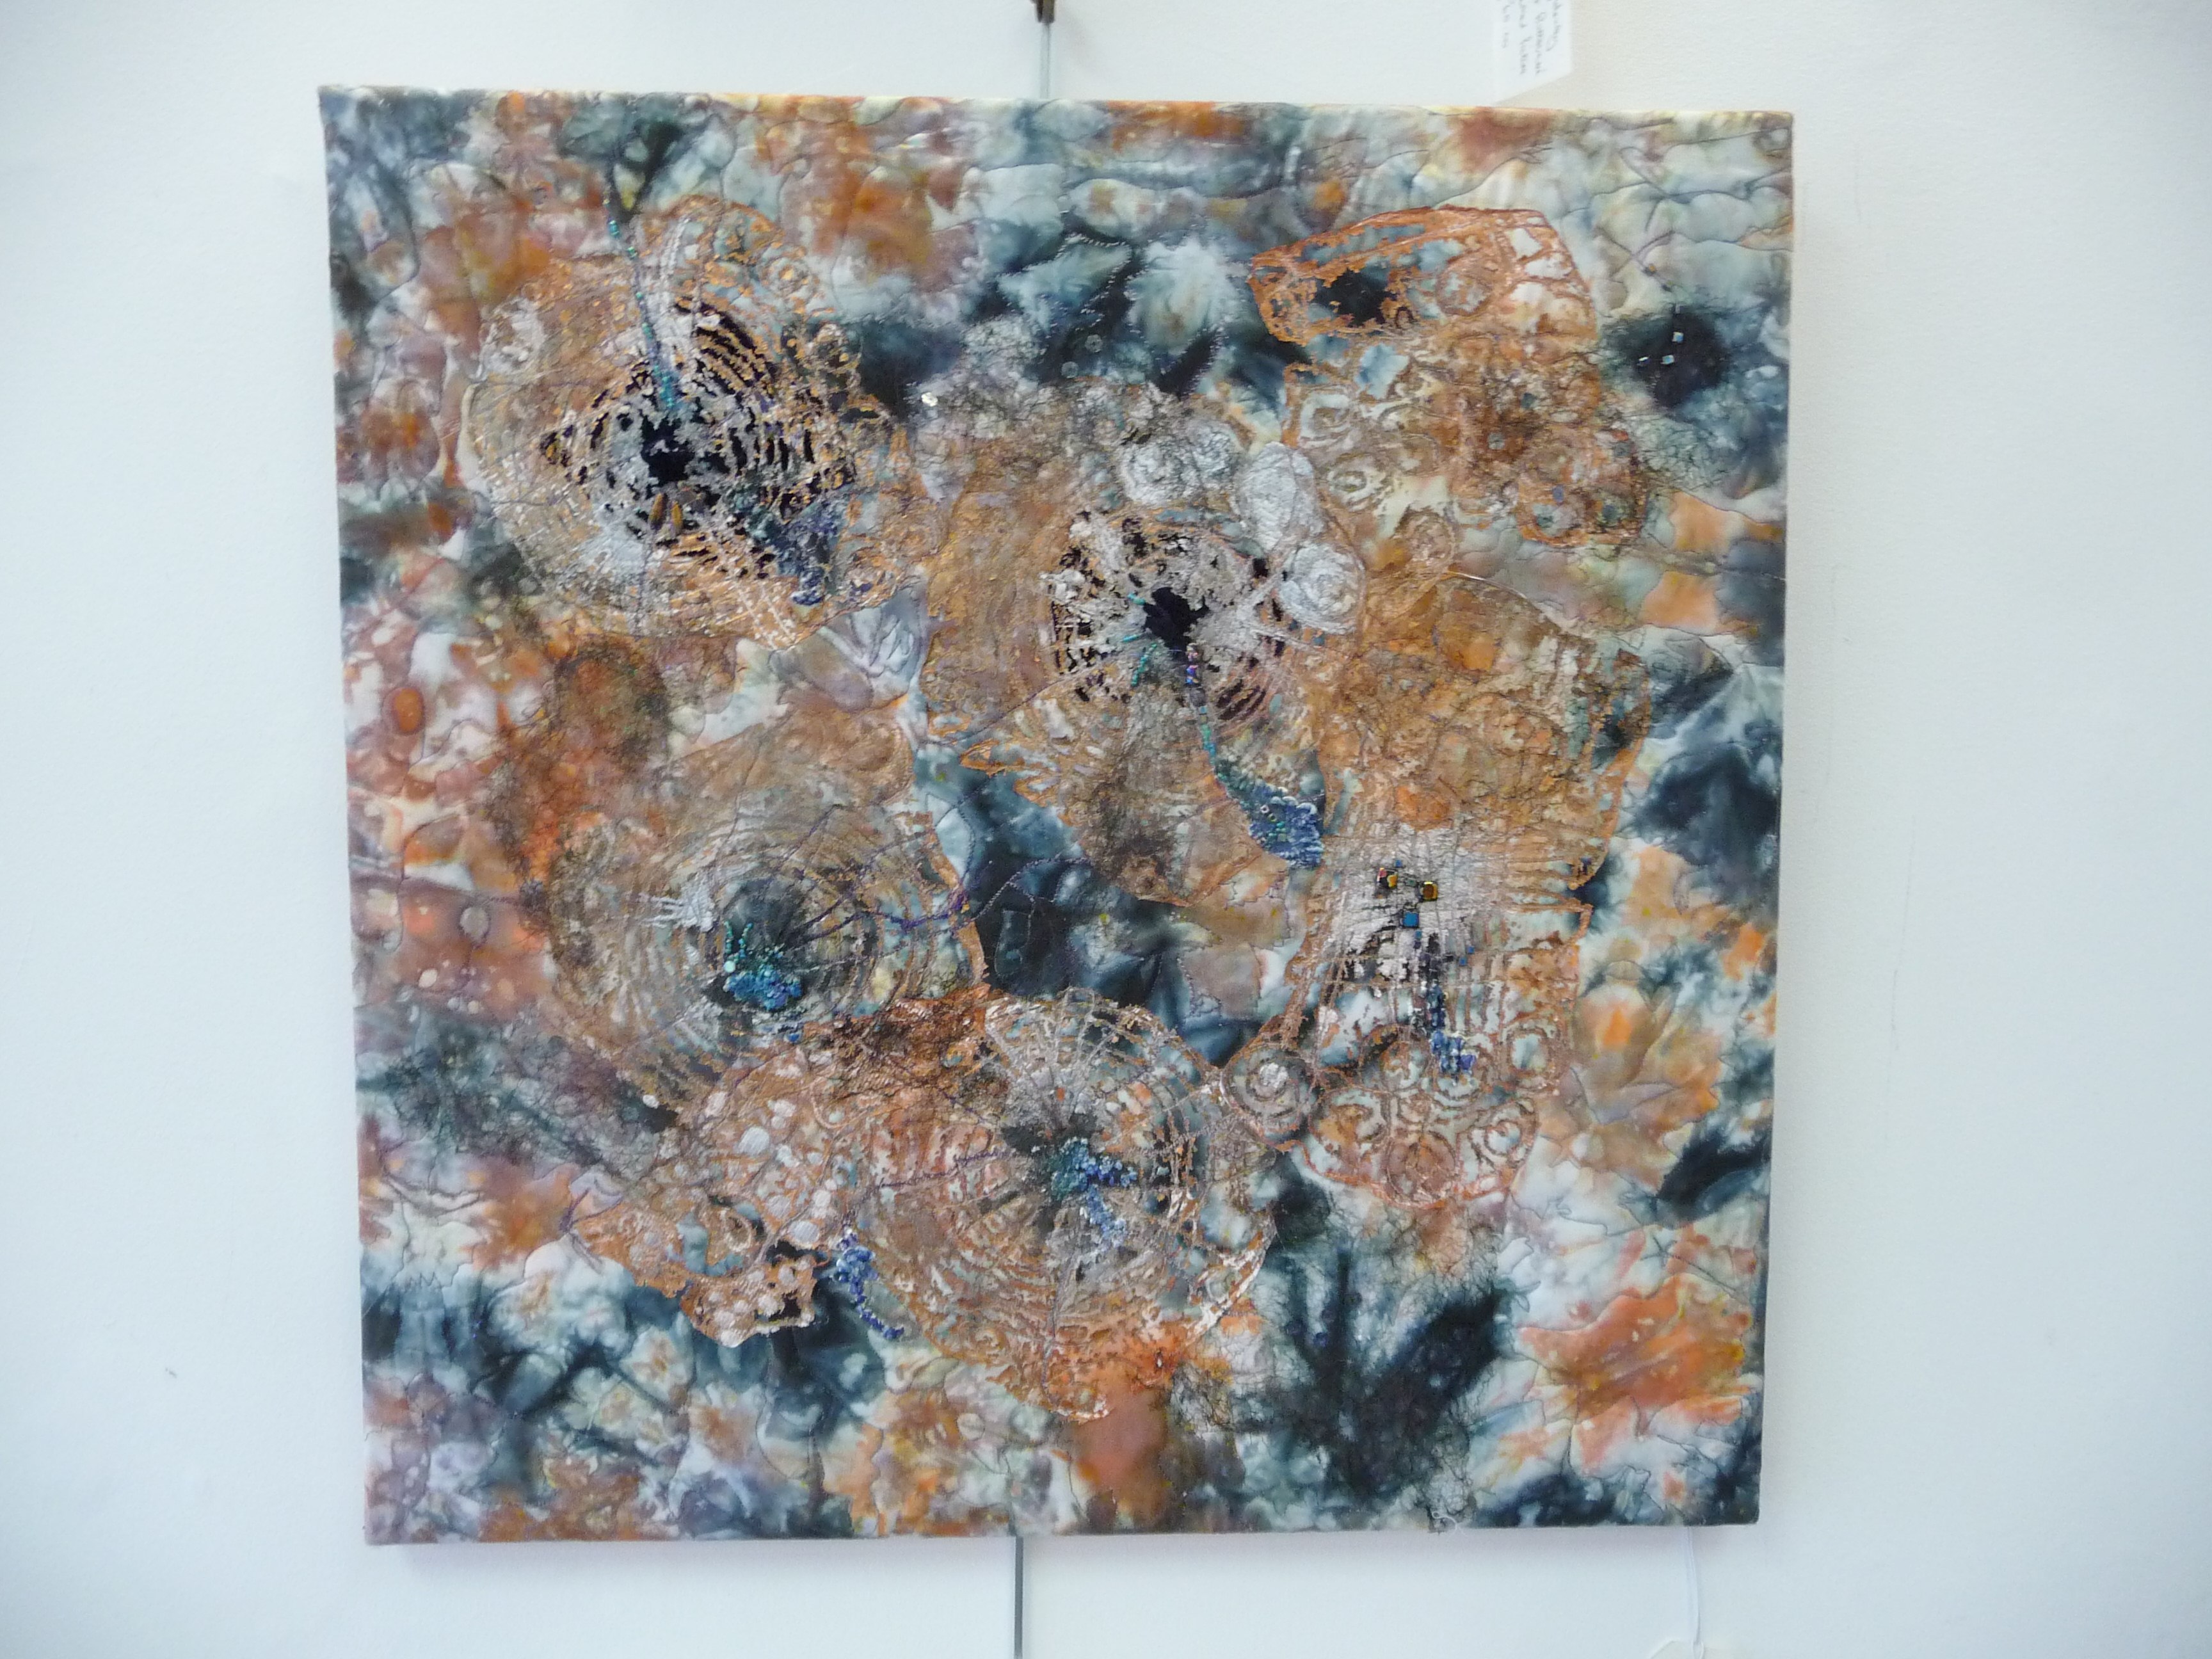 RIVERS OF FIRE by Sue Chisnell-Sumner, tray dyed cotton and mixed media